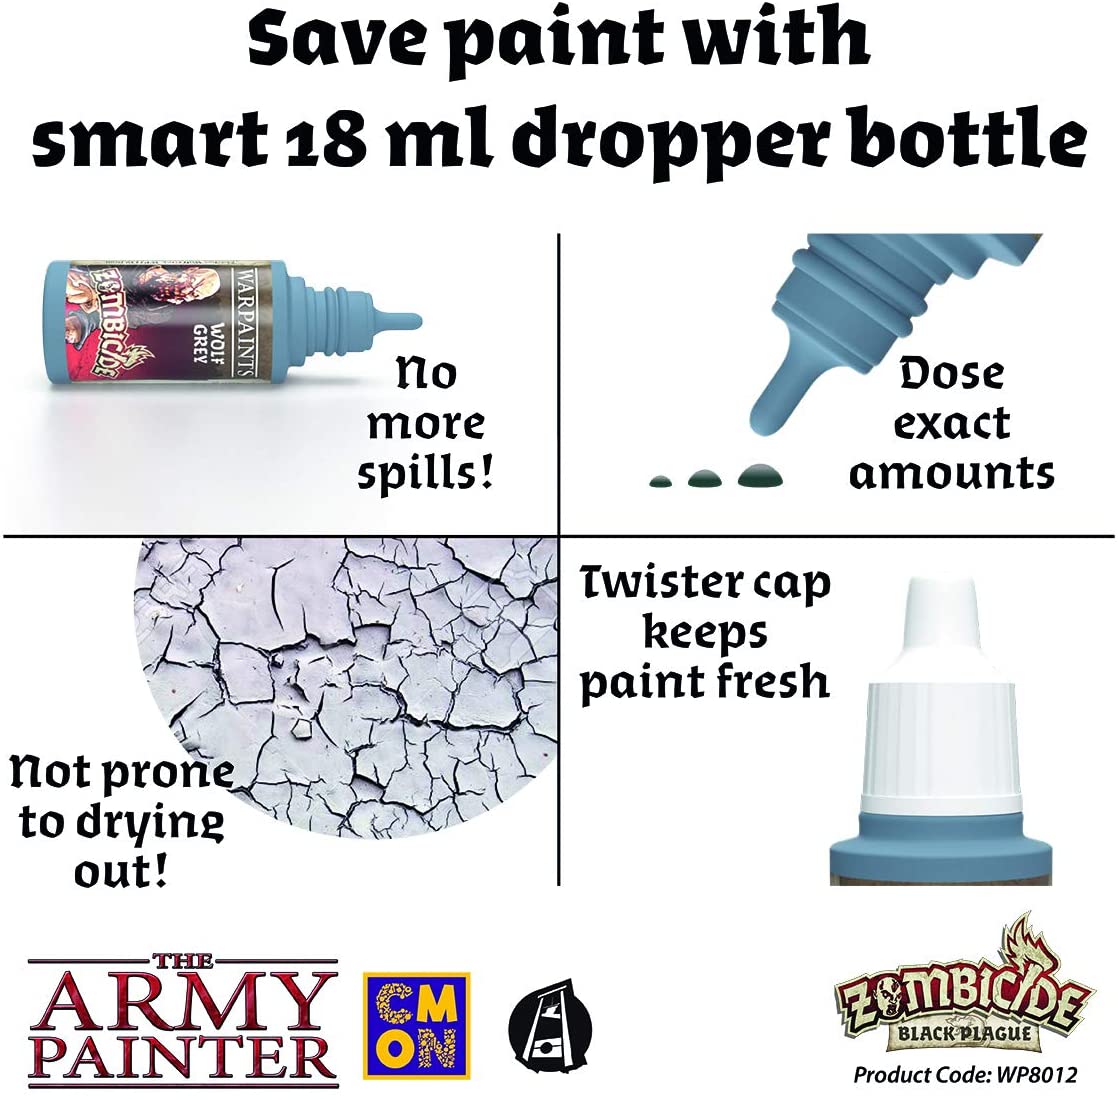 Board games, expansions and other products in Army Painter Paints